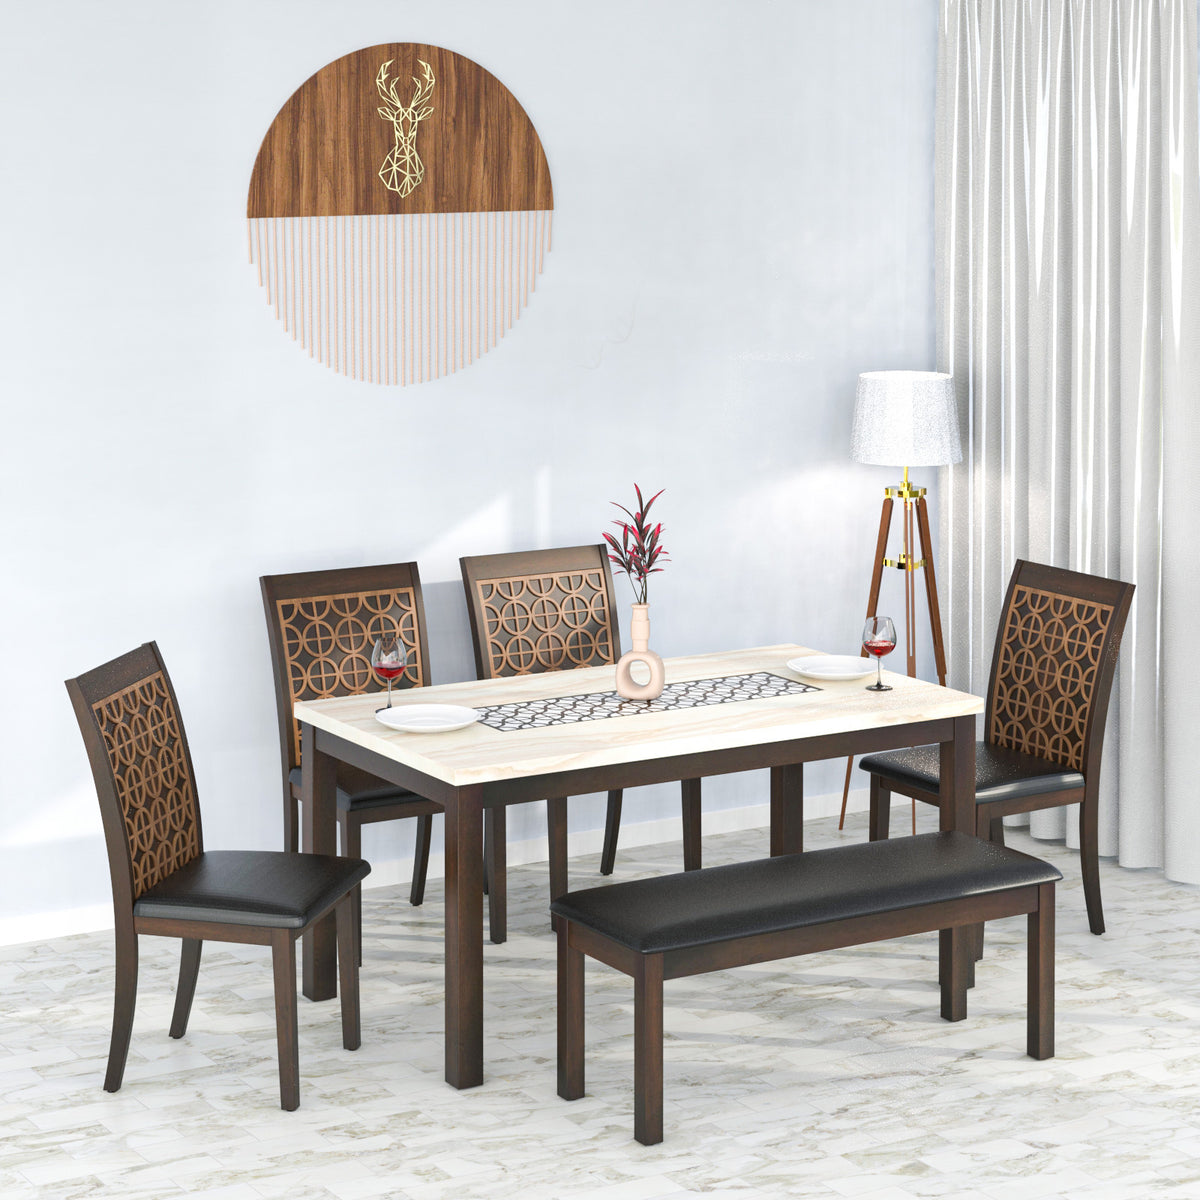 Camden 6 Seater Solid Wood Dining Set With Bench (Dark Walnut)| At-home ...